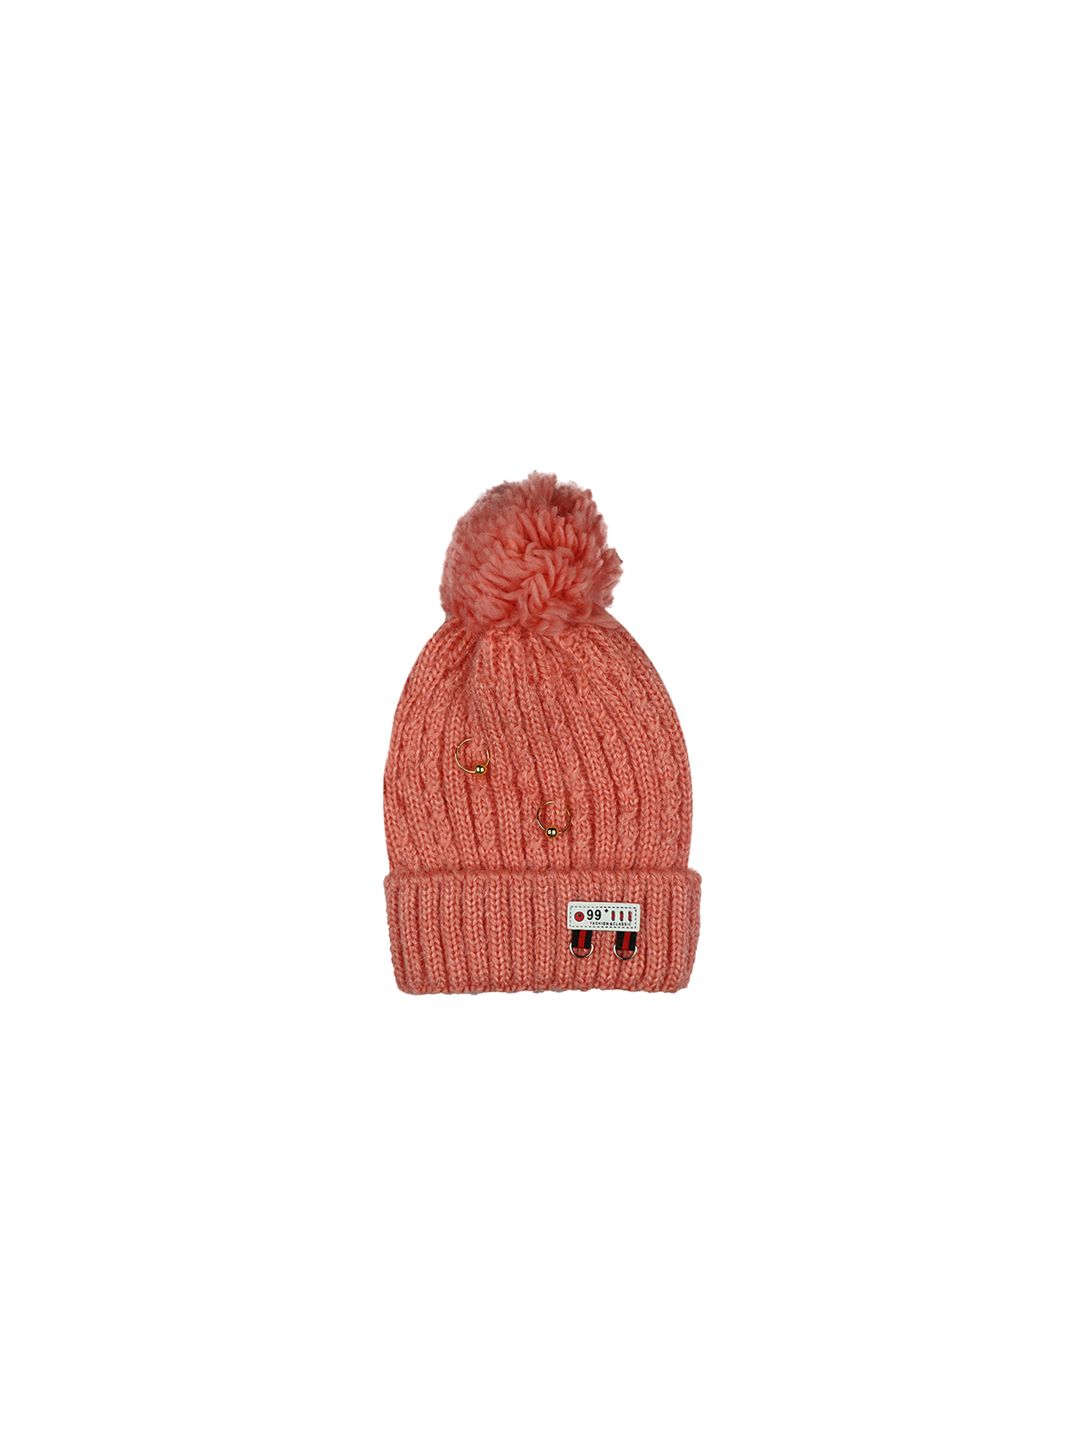 iSWEVEN Unisex Coral Pink Solid Beanie Price in India